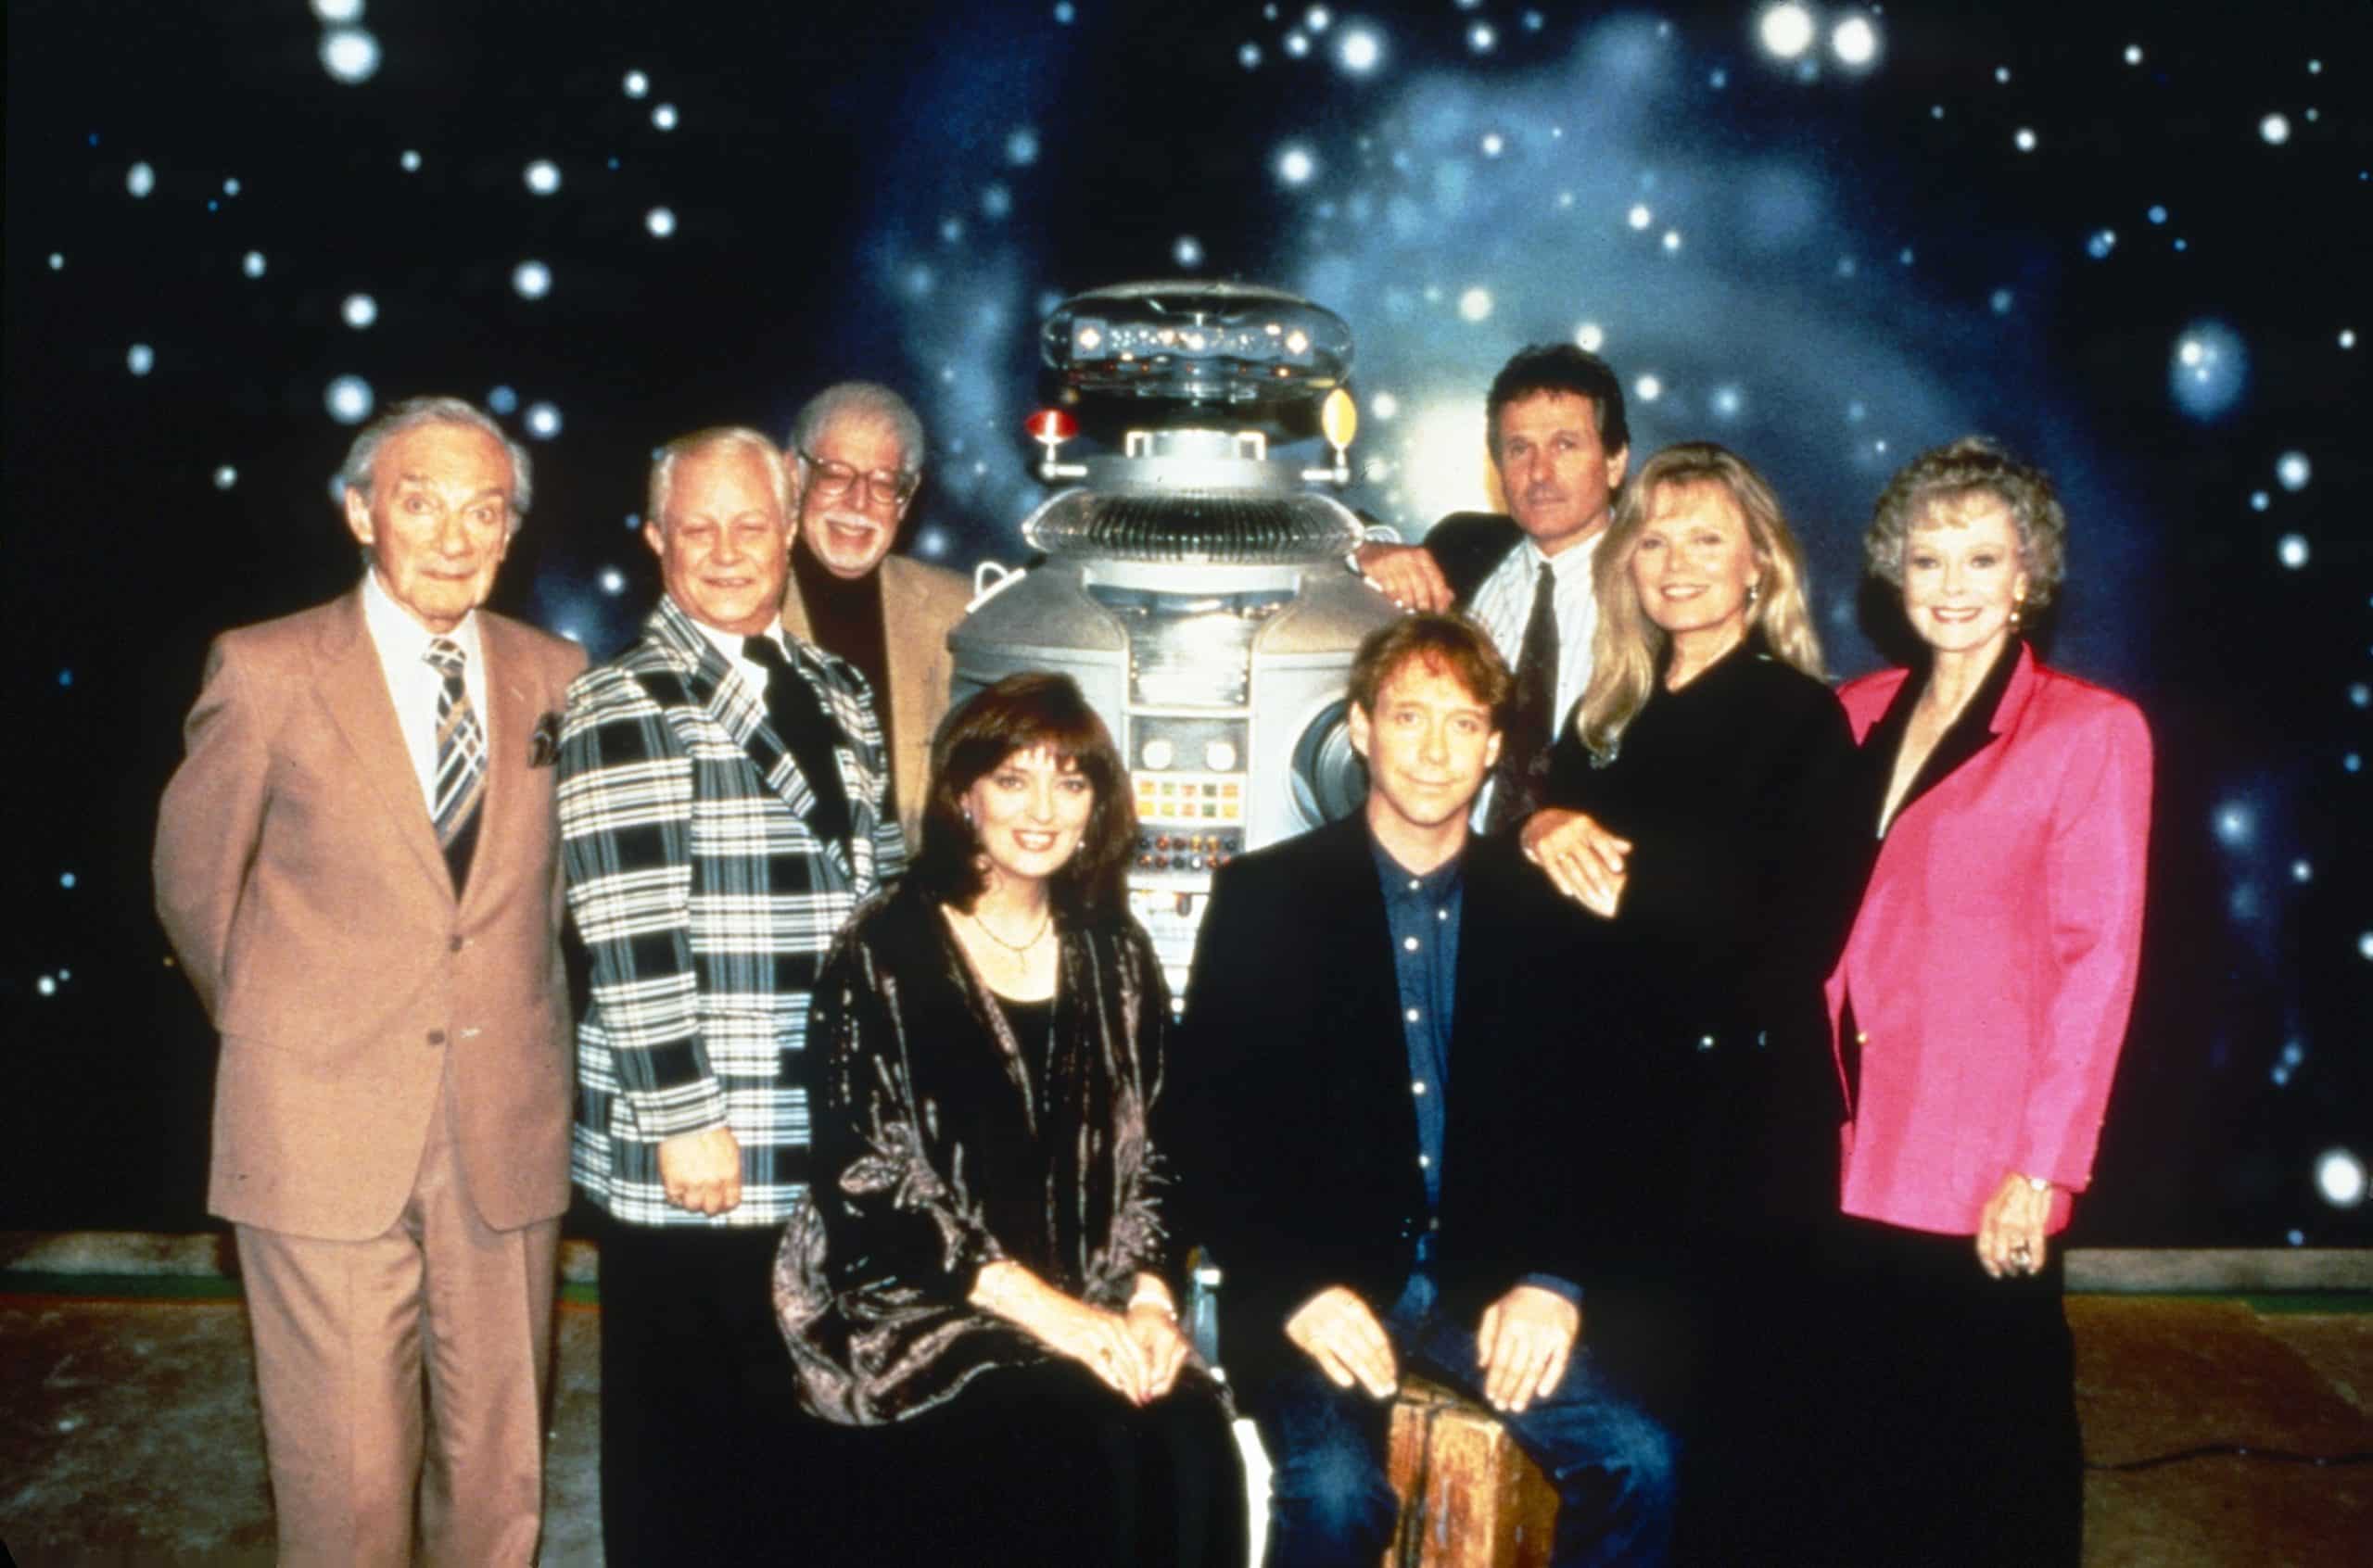 LOST IN SPACE, Sci-Fi Channel commemorates the 'launch date' of the Jupiter II with a LOST IN SPACE marathon, from left: Jonathan Harris, Bob May, Dick Tufeld (voice of 'Robot'), Angela Cartwright, Bill Mumy, Mark Goddard, Marta Kristen, June Lockhart, aired 10/16/1997